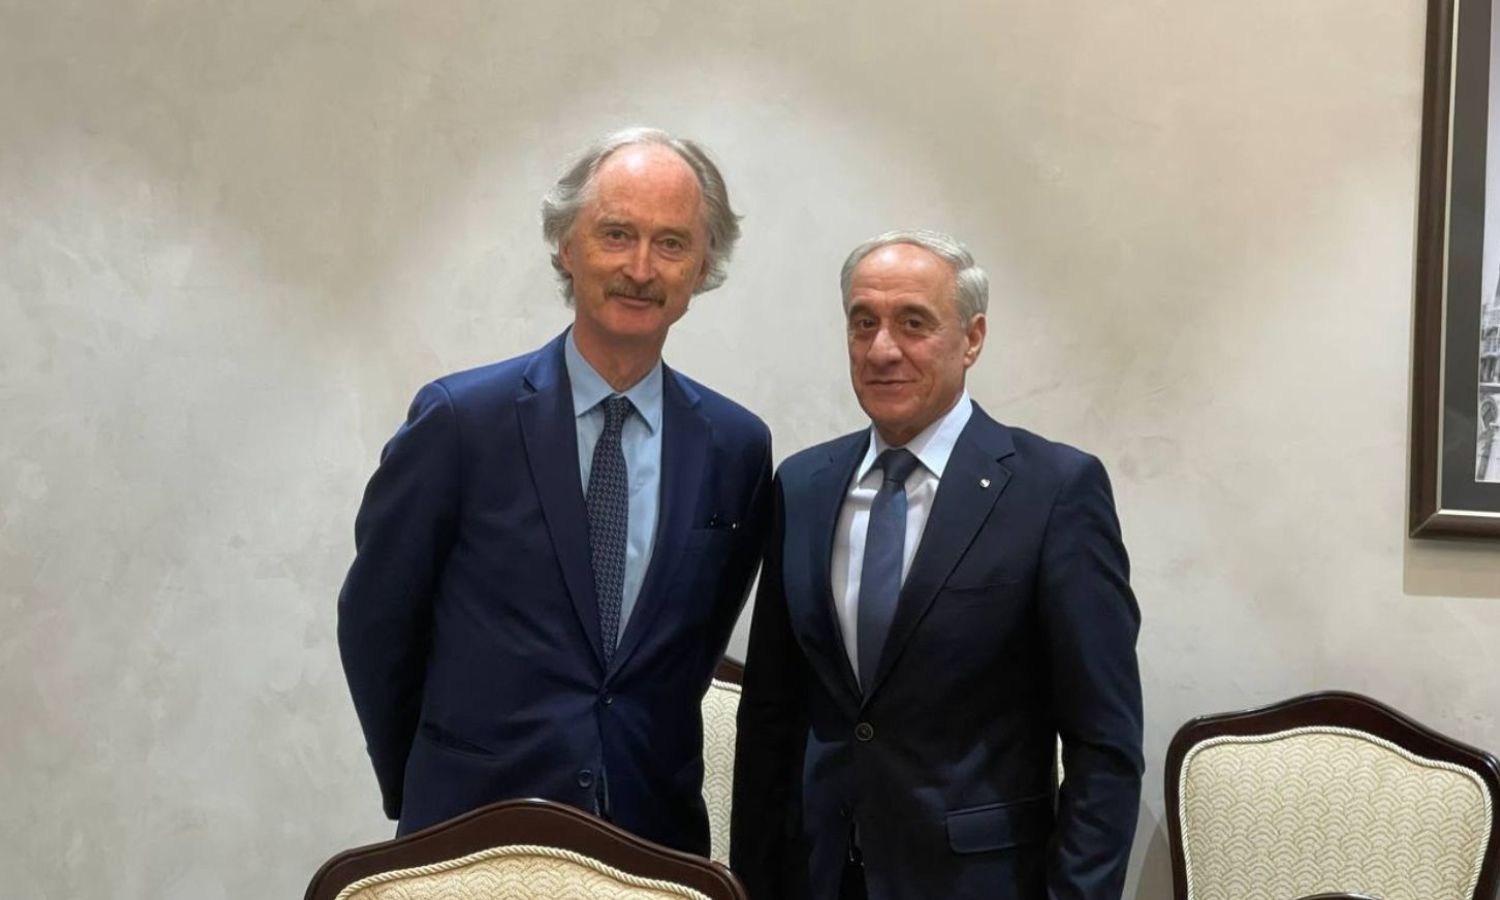 Syrian Deputy Foreign Minister Ayman Sousan meets with the UN envoy to Syria, Geir Pedersen, in Astana - June 20, 2023 (State TV)